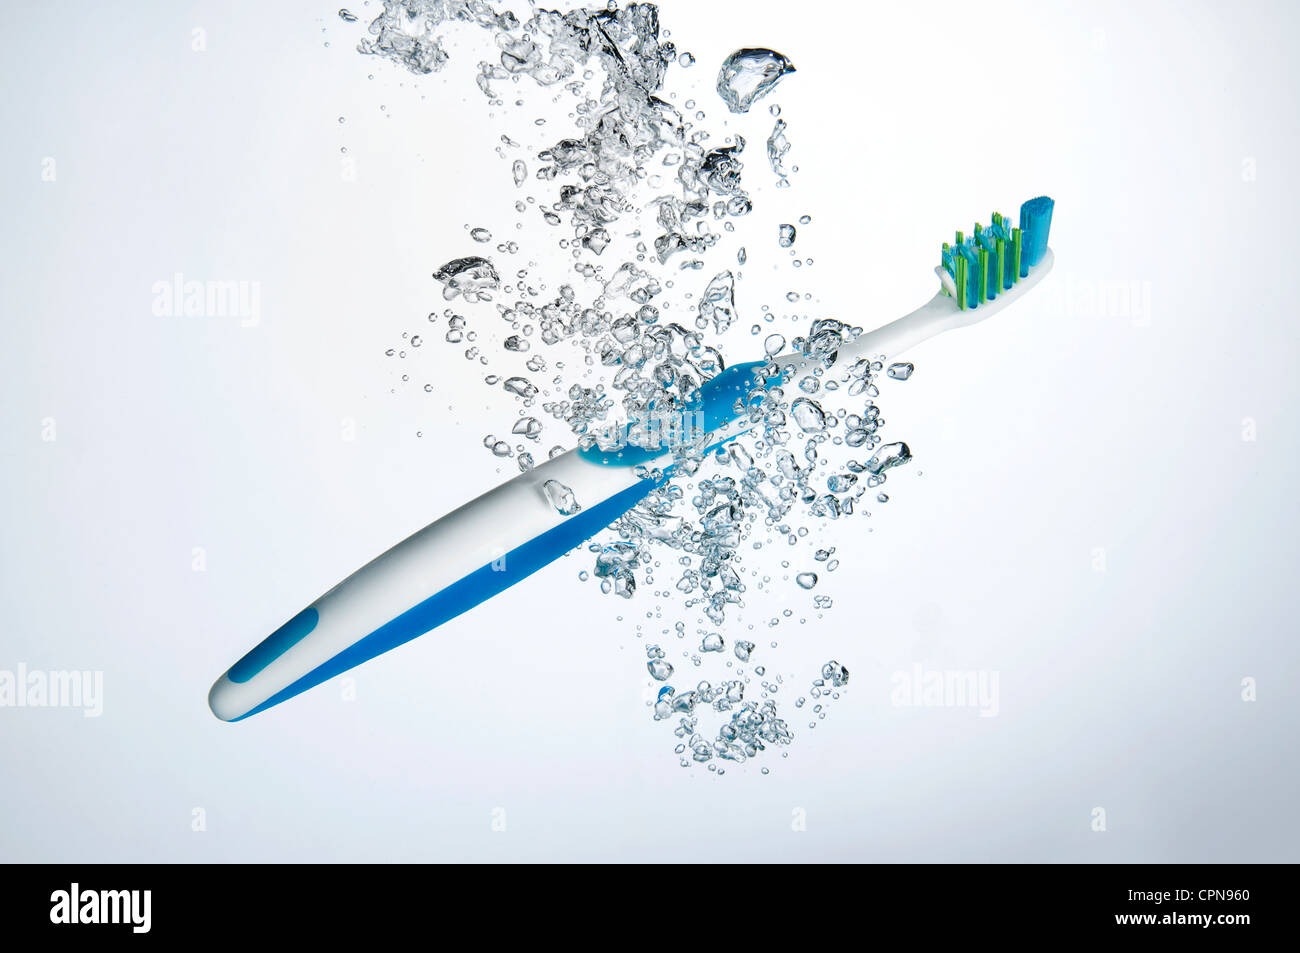 Toothbrush submerged in water Stock Photo